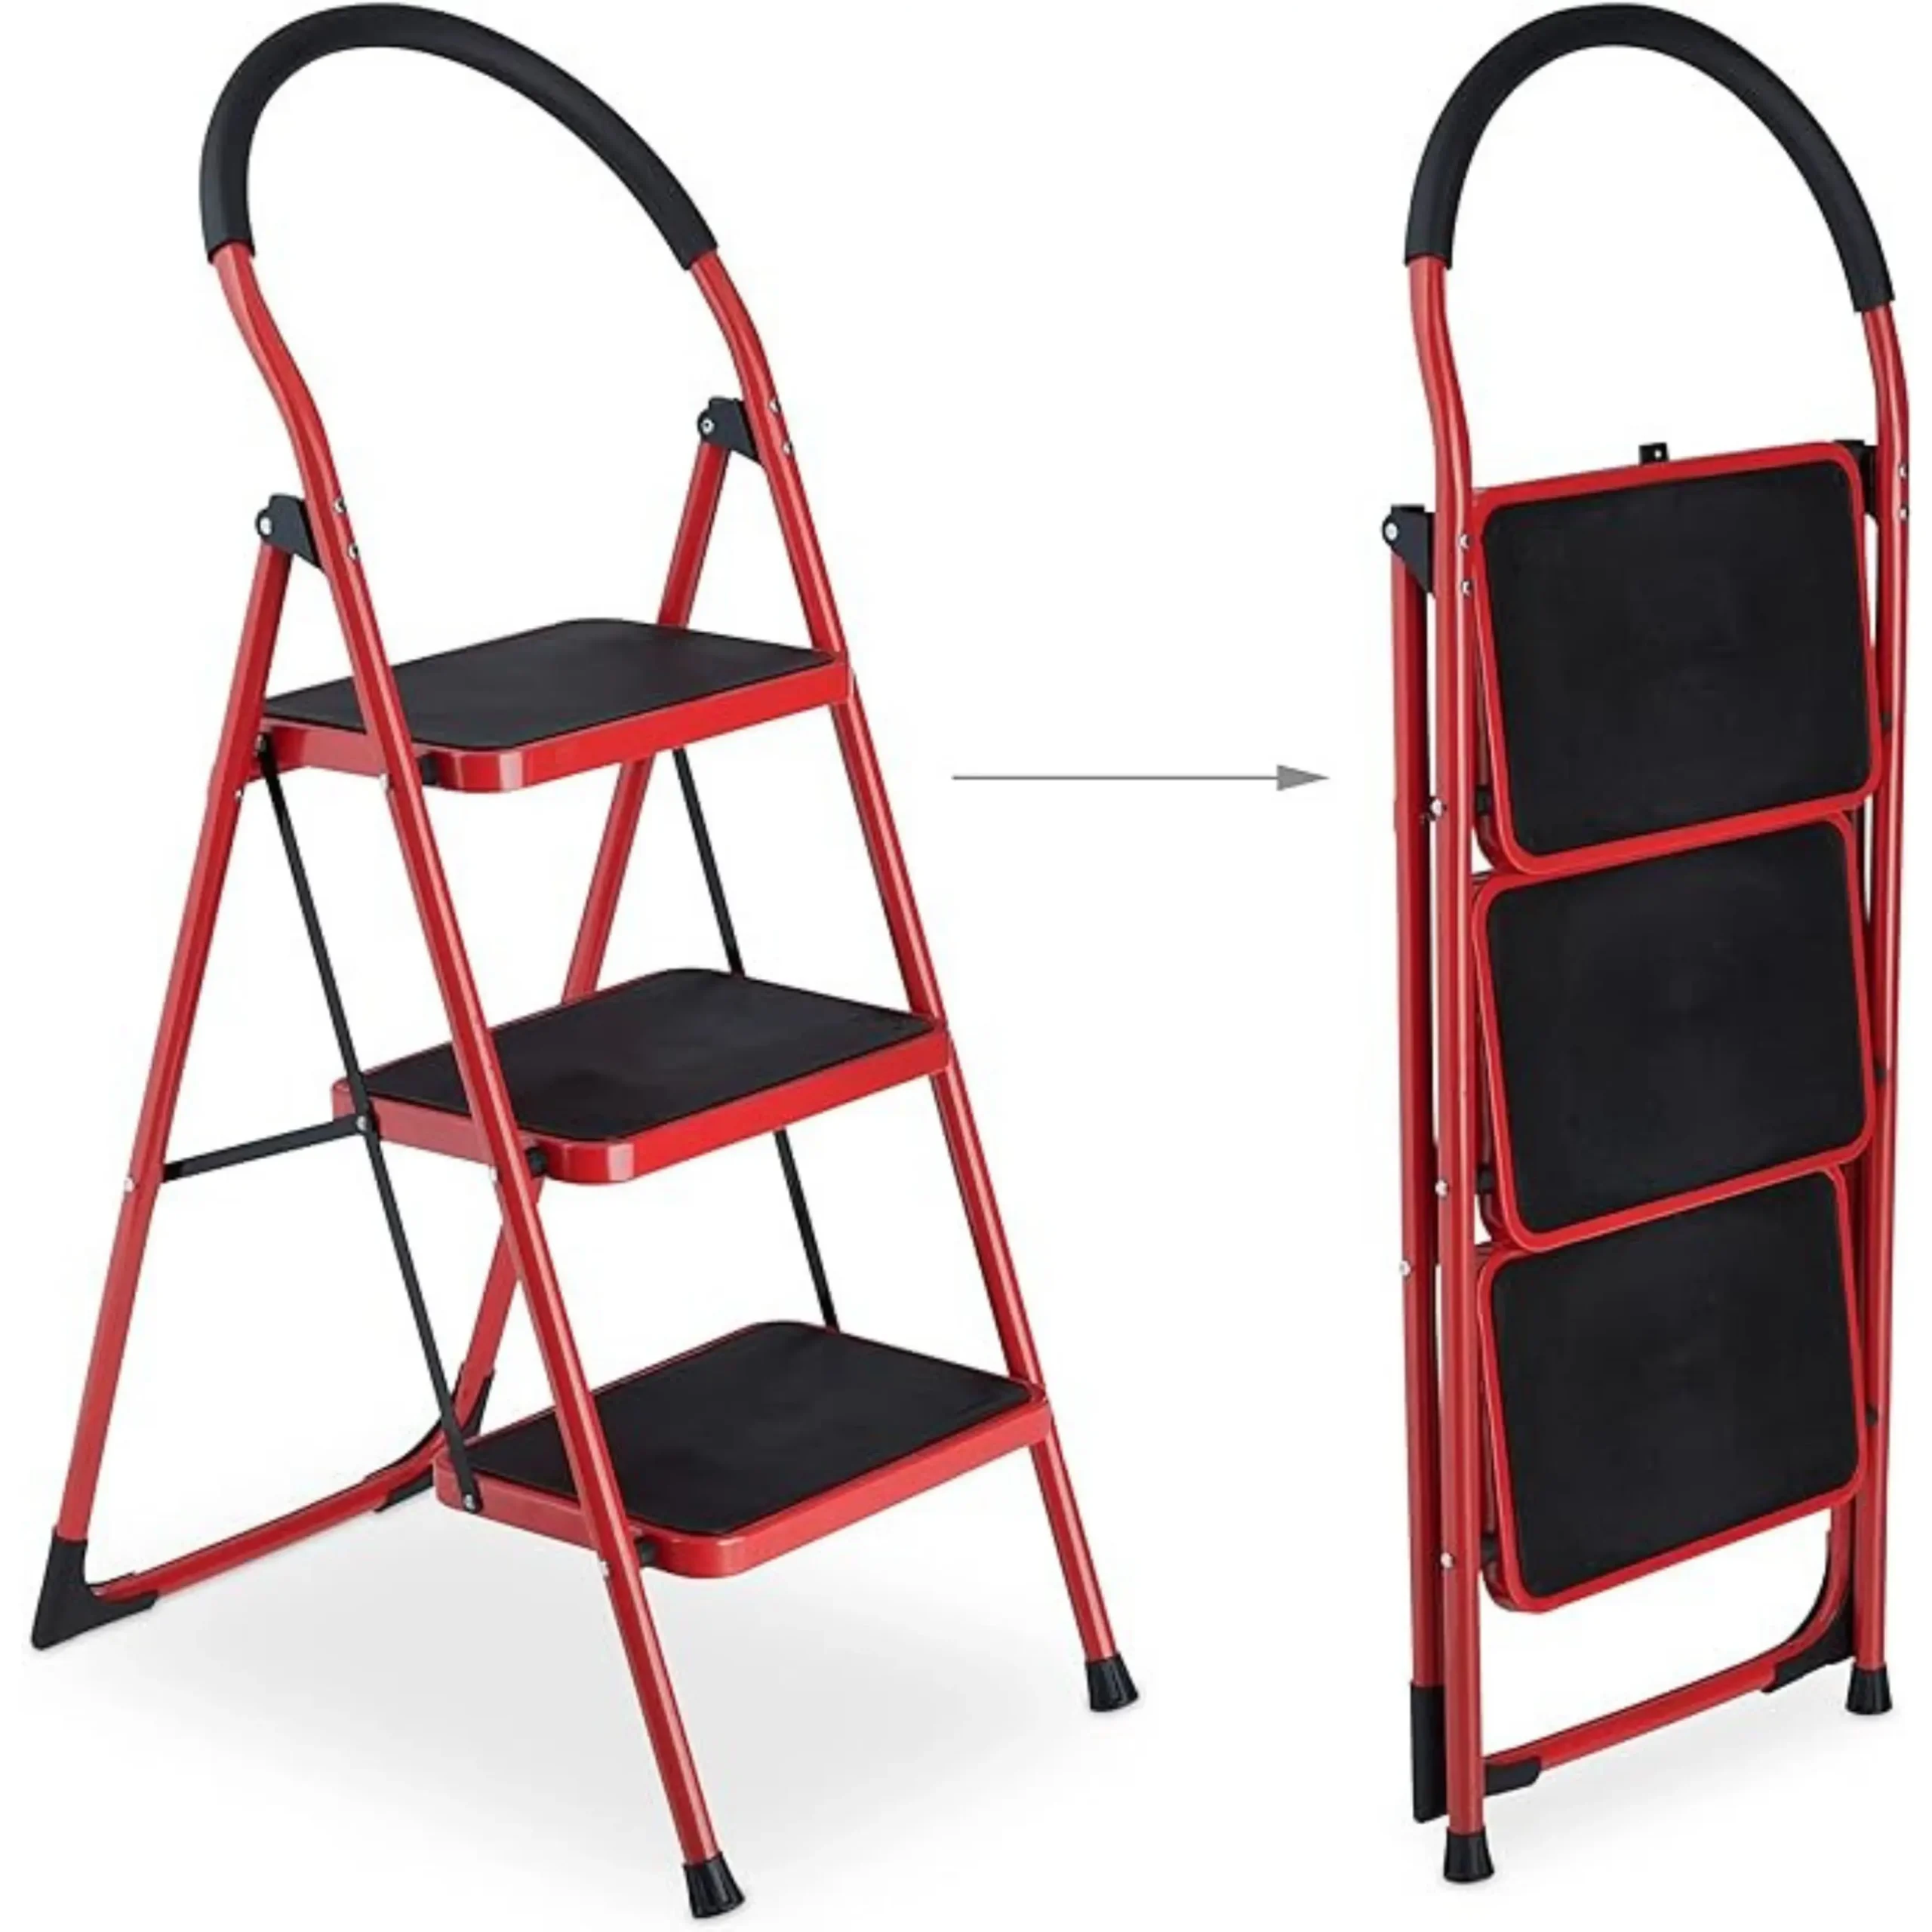 3 LAYER MULTIFUNCTION HOUSEHOLD LADDER, FOLDABLE LADDER WITH SAFETY HOLD HANDLE, STURDY AND DURABLE LADDER